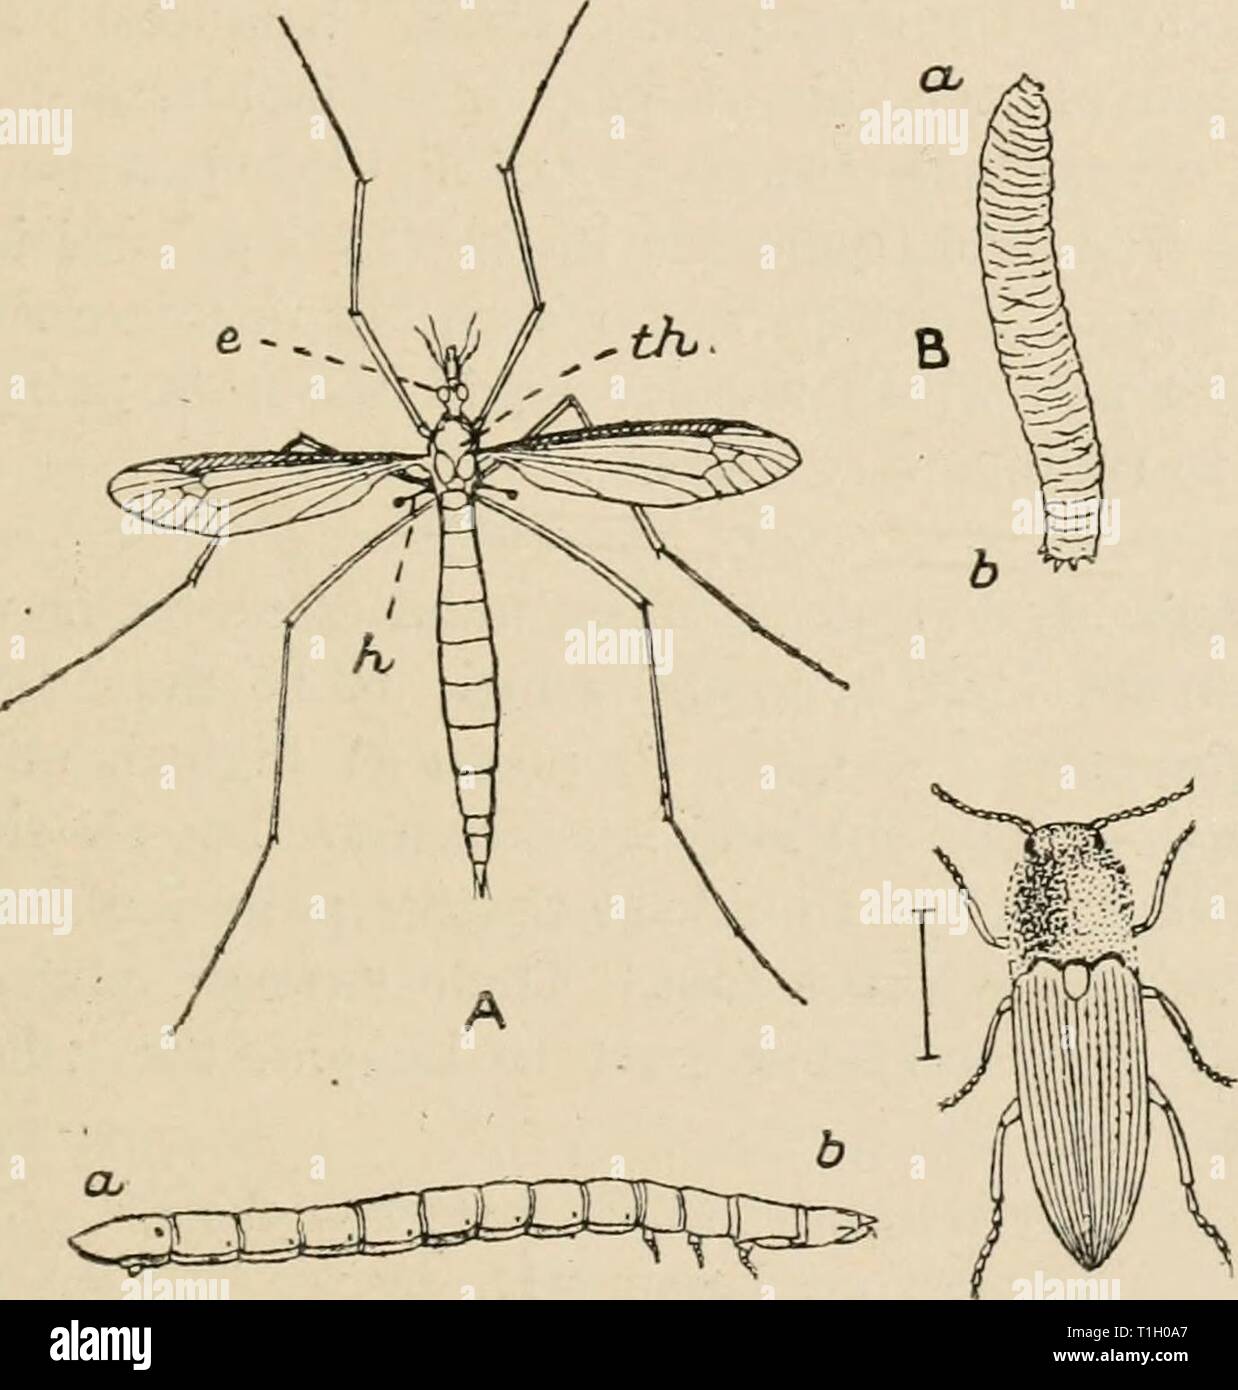 Diversions of a naturalist ([1915]) Diversions of a naturalist  diversionsofnatu00lankuoft Year: [1915]  DADDY-LONG-LEGS 217 size, are present in them in a very much dwindled condi- tion. Since most of our common flies are very small it is    D  Fig. 22. A, The Crane-fly (Daddy-Long-Legs), Tipula oleracea. e, the left eye ; /i, one of the balancers or ' halleres,' which are the modified second pair of wings ; /i, the thorax. Natural size. B, The 'Leather-jacket,' the grub of the crane-fly. a, head ; d, tail. Natural size. C, The Click-beetle or Skip-jack, Elater obscurus. The line beside it sh Stock Photo